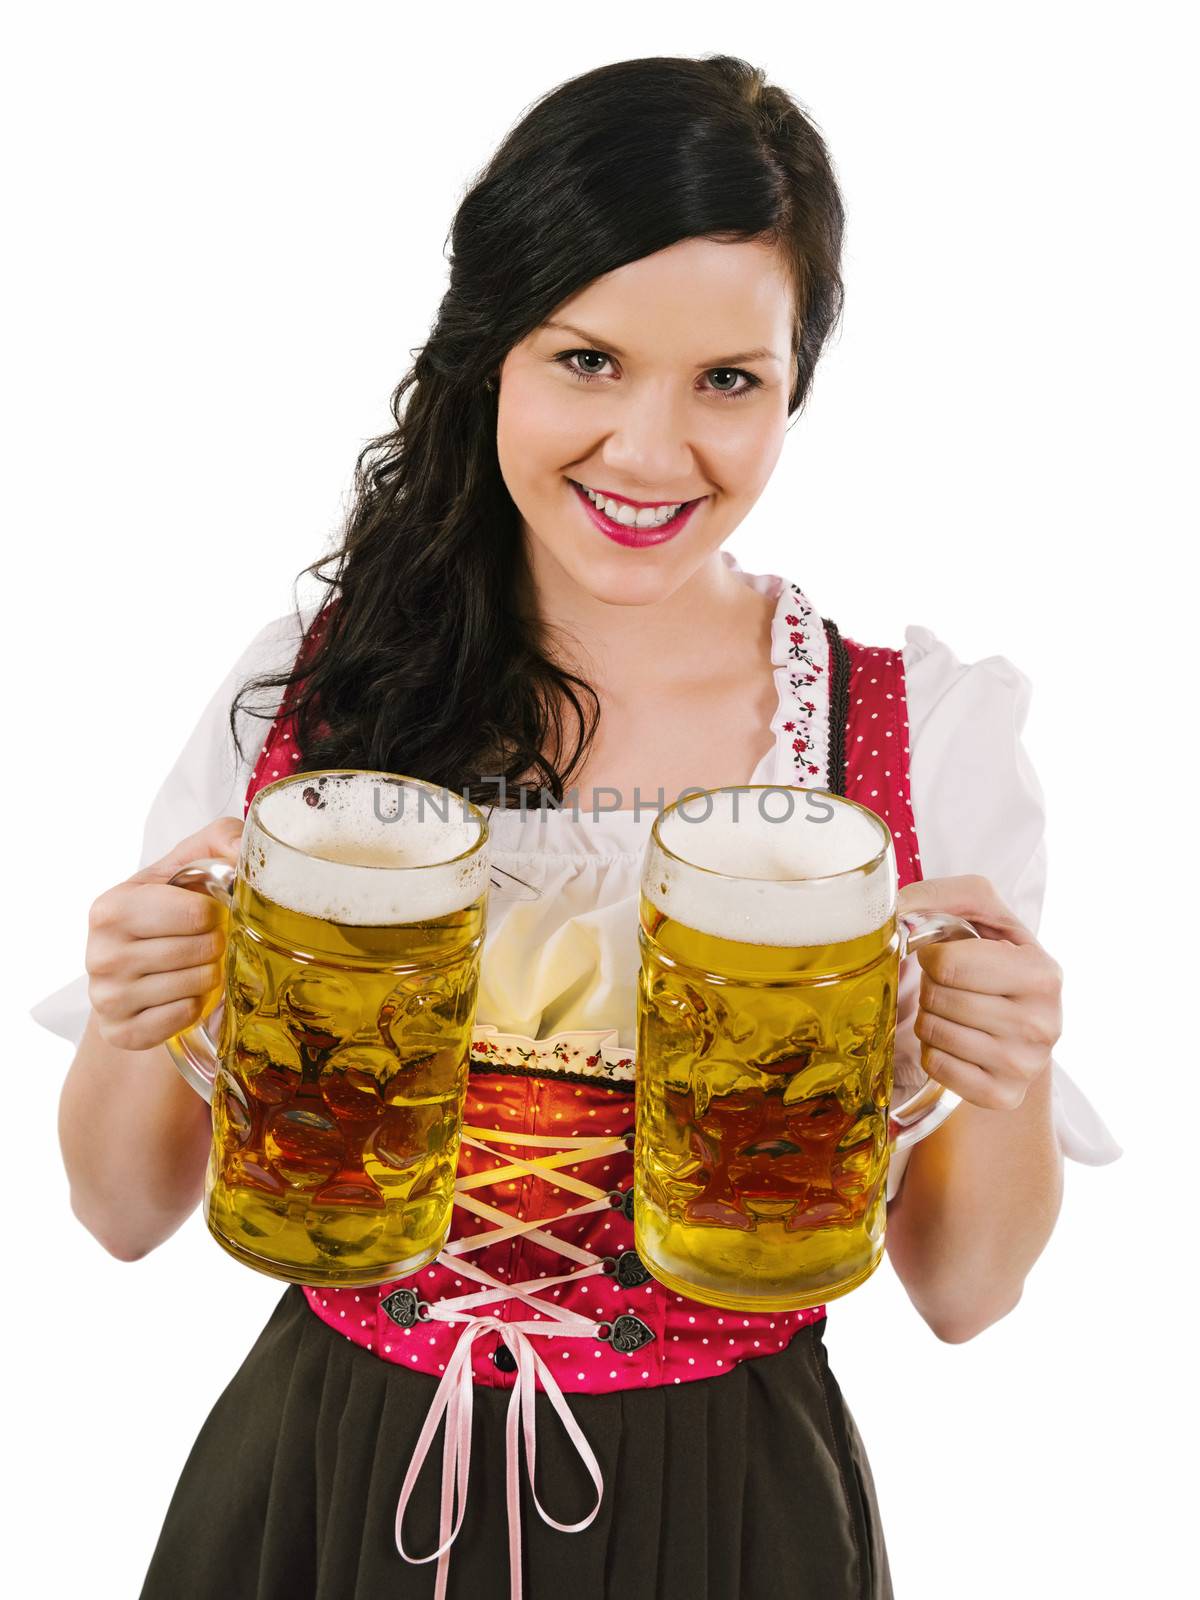 Photo of a beautiful woman wearing traditional dirndl and serving beer.